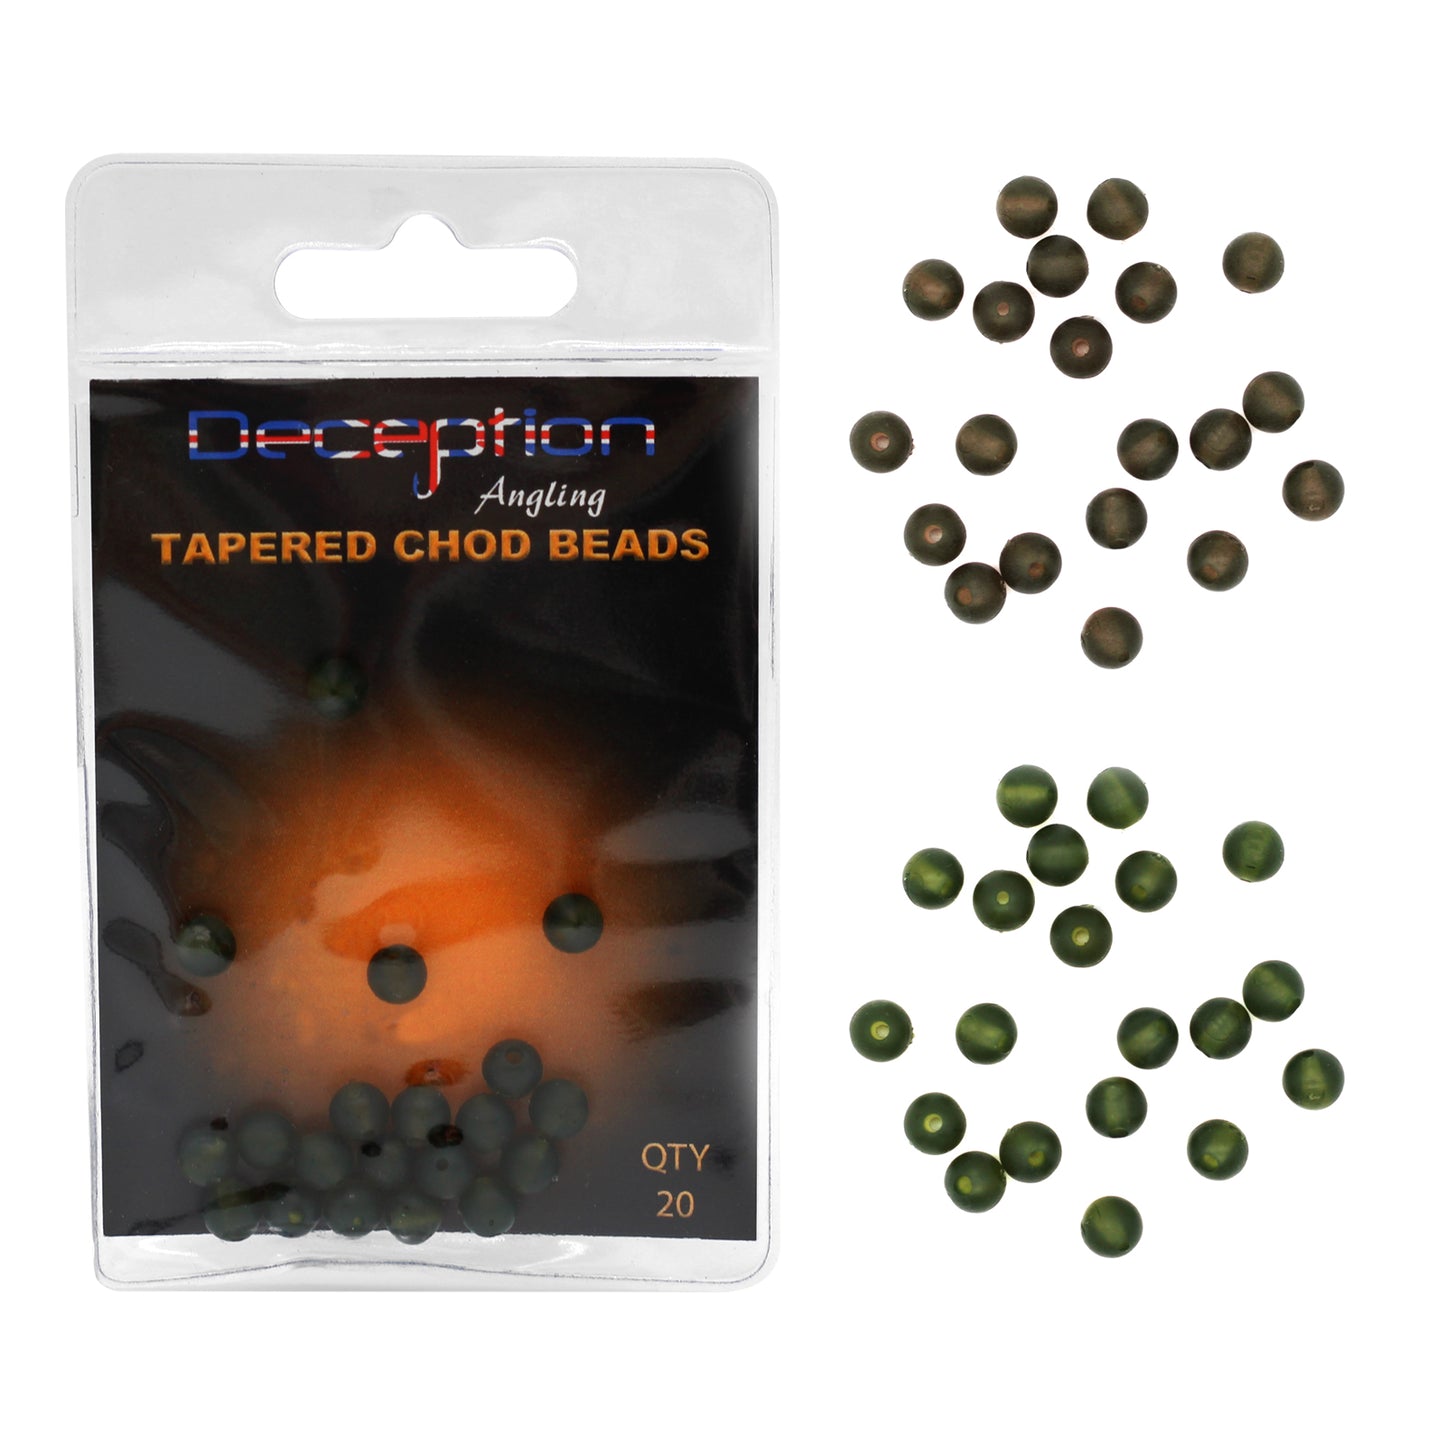 Deception Angling Tapered Chod Beads for Fishing Pack of 20 in Two Colours